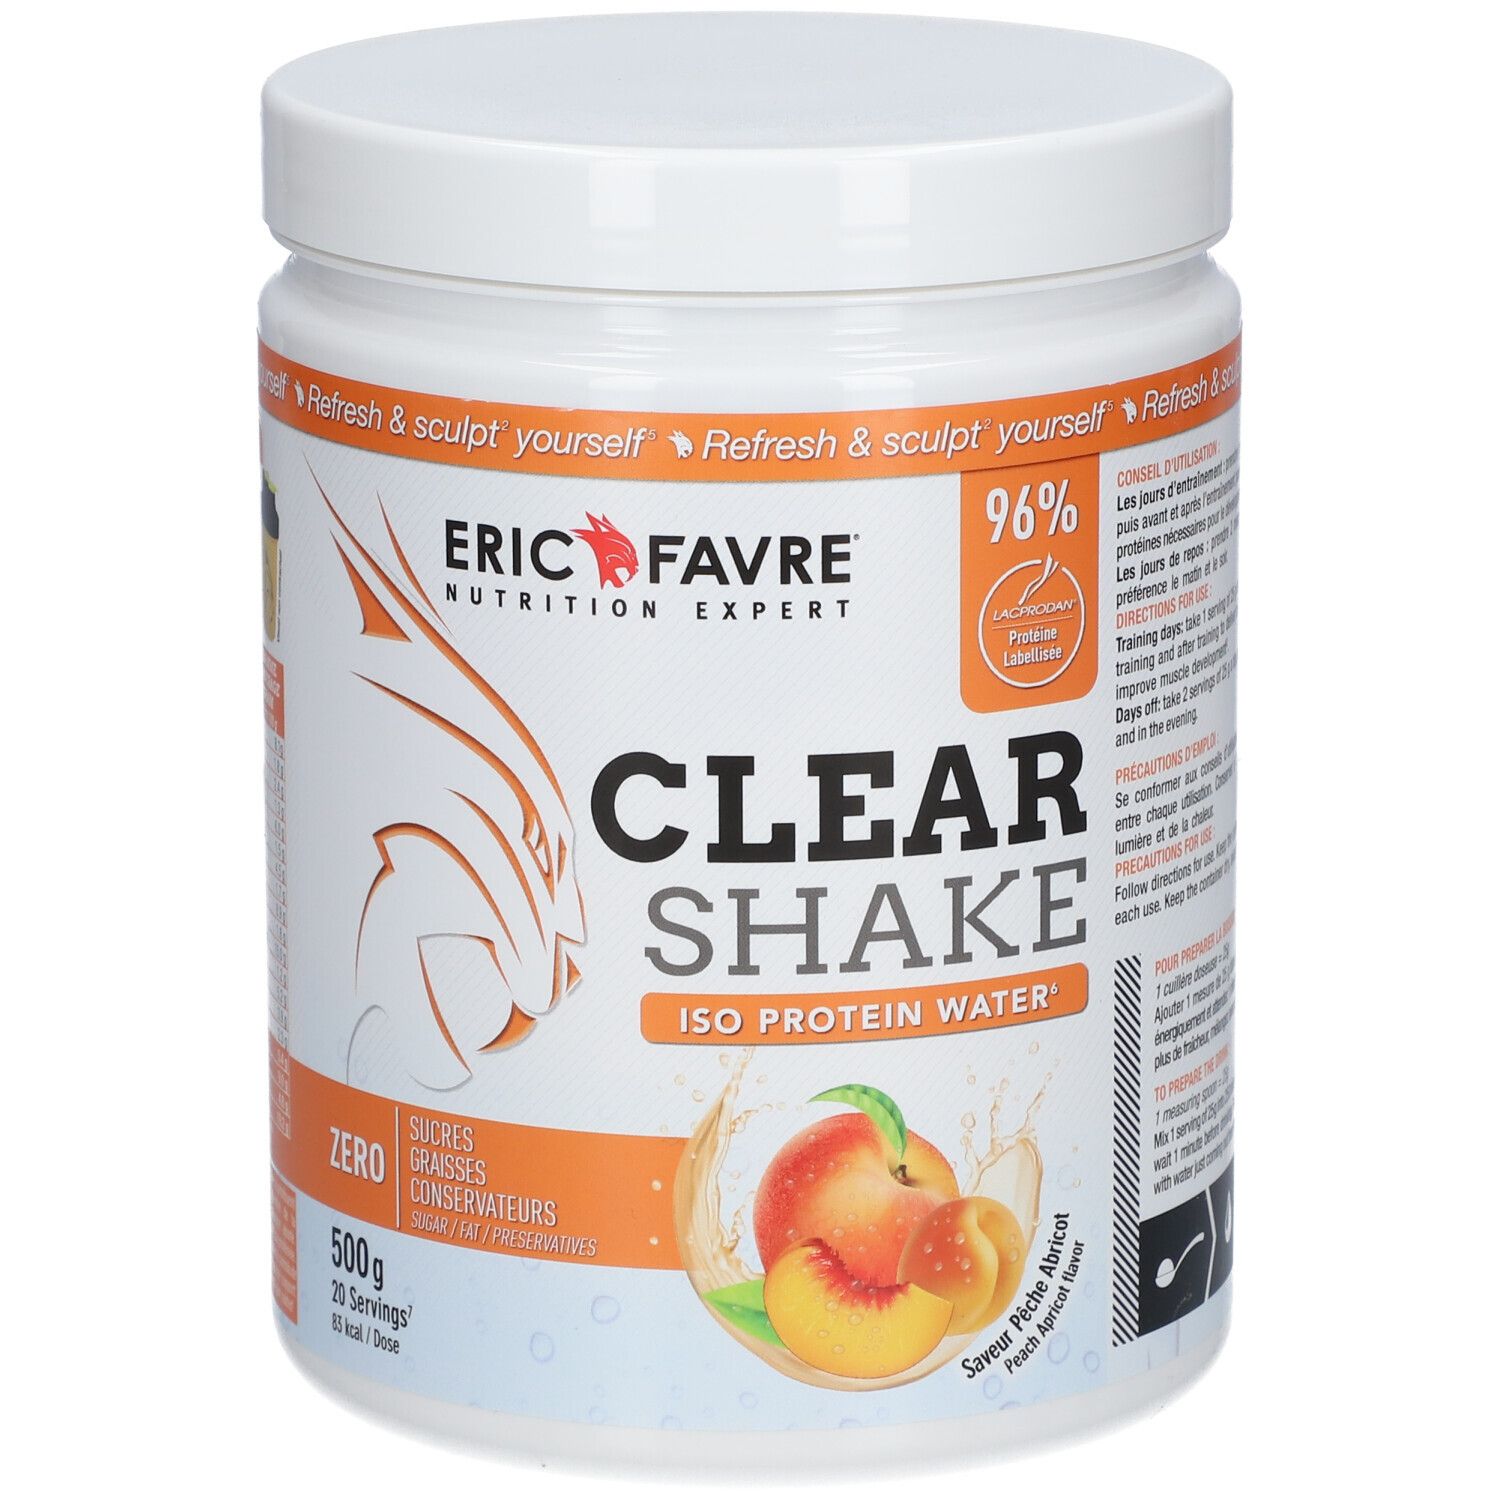 Eric Favre Clear Shake - Iso Protein Water Saveur Pêche-Abricot